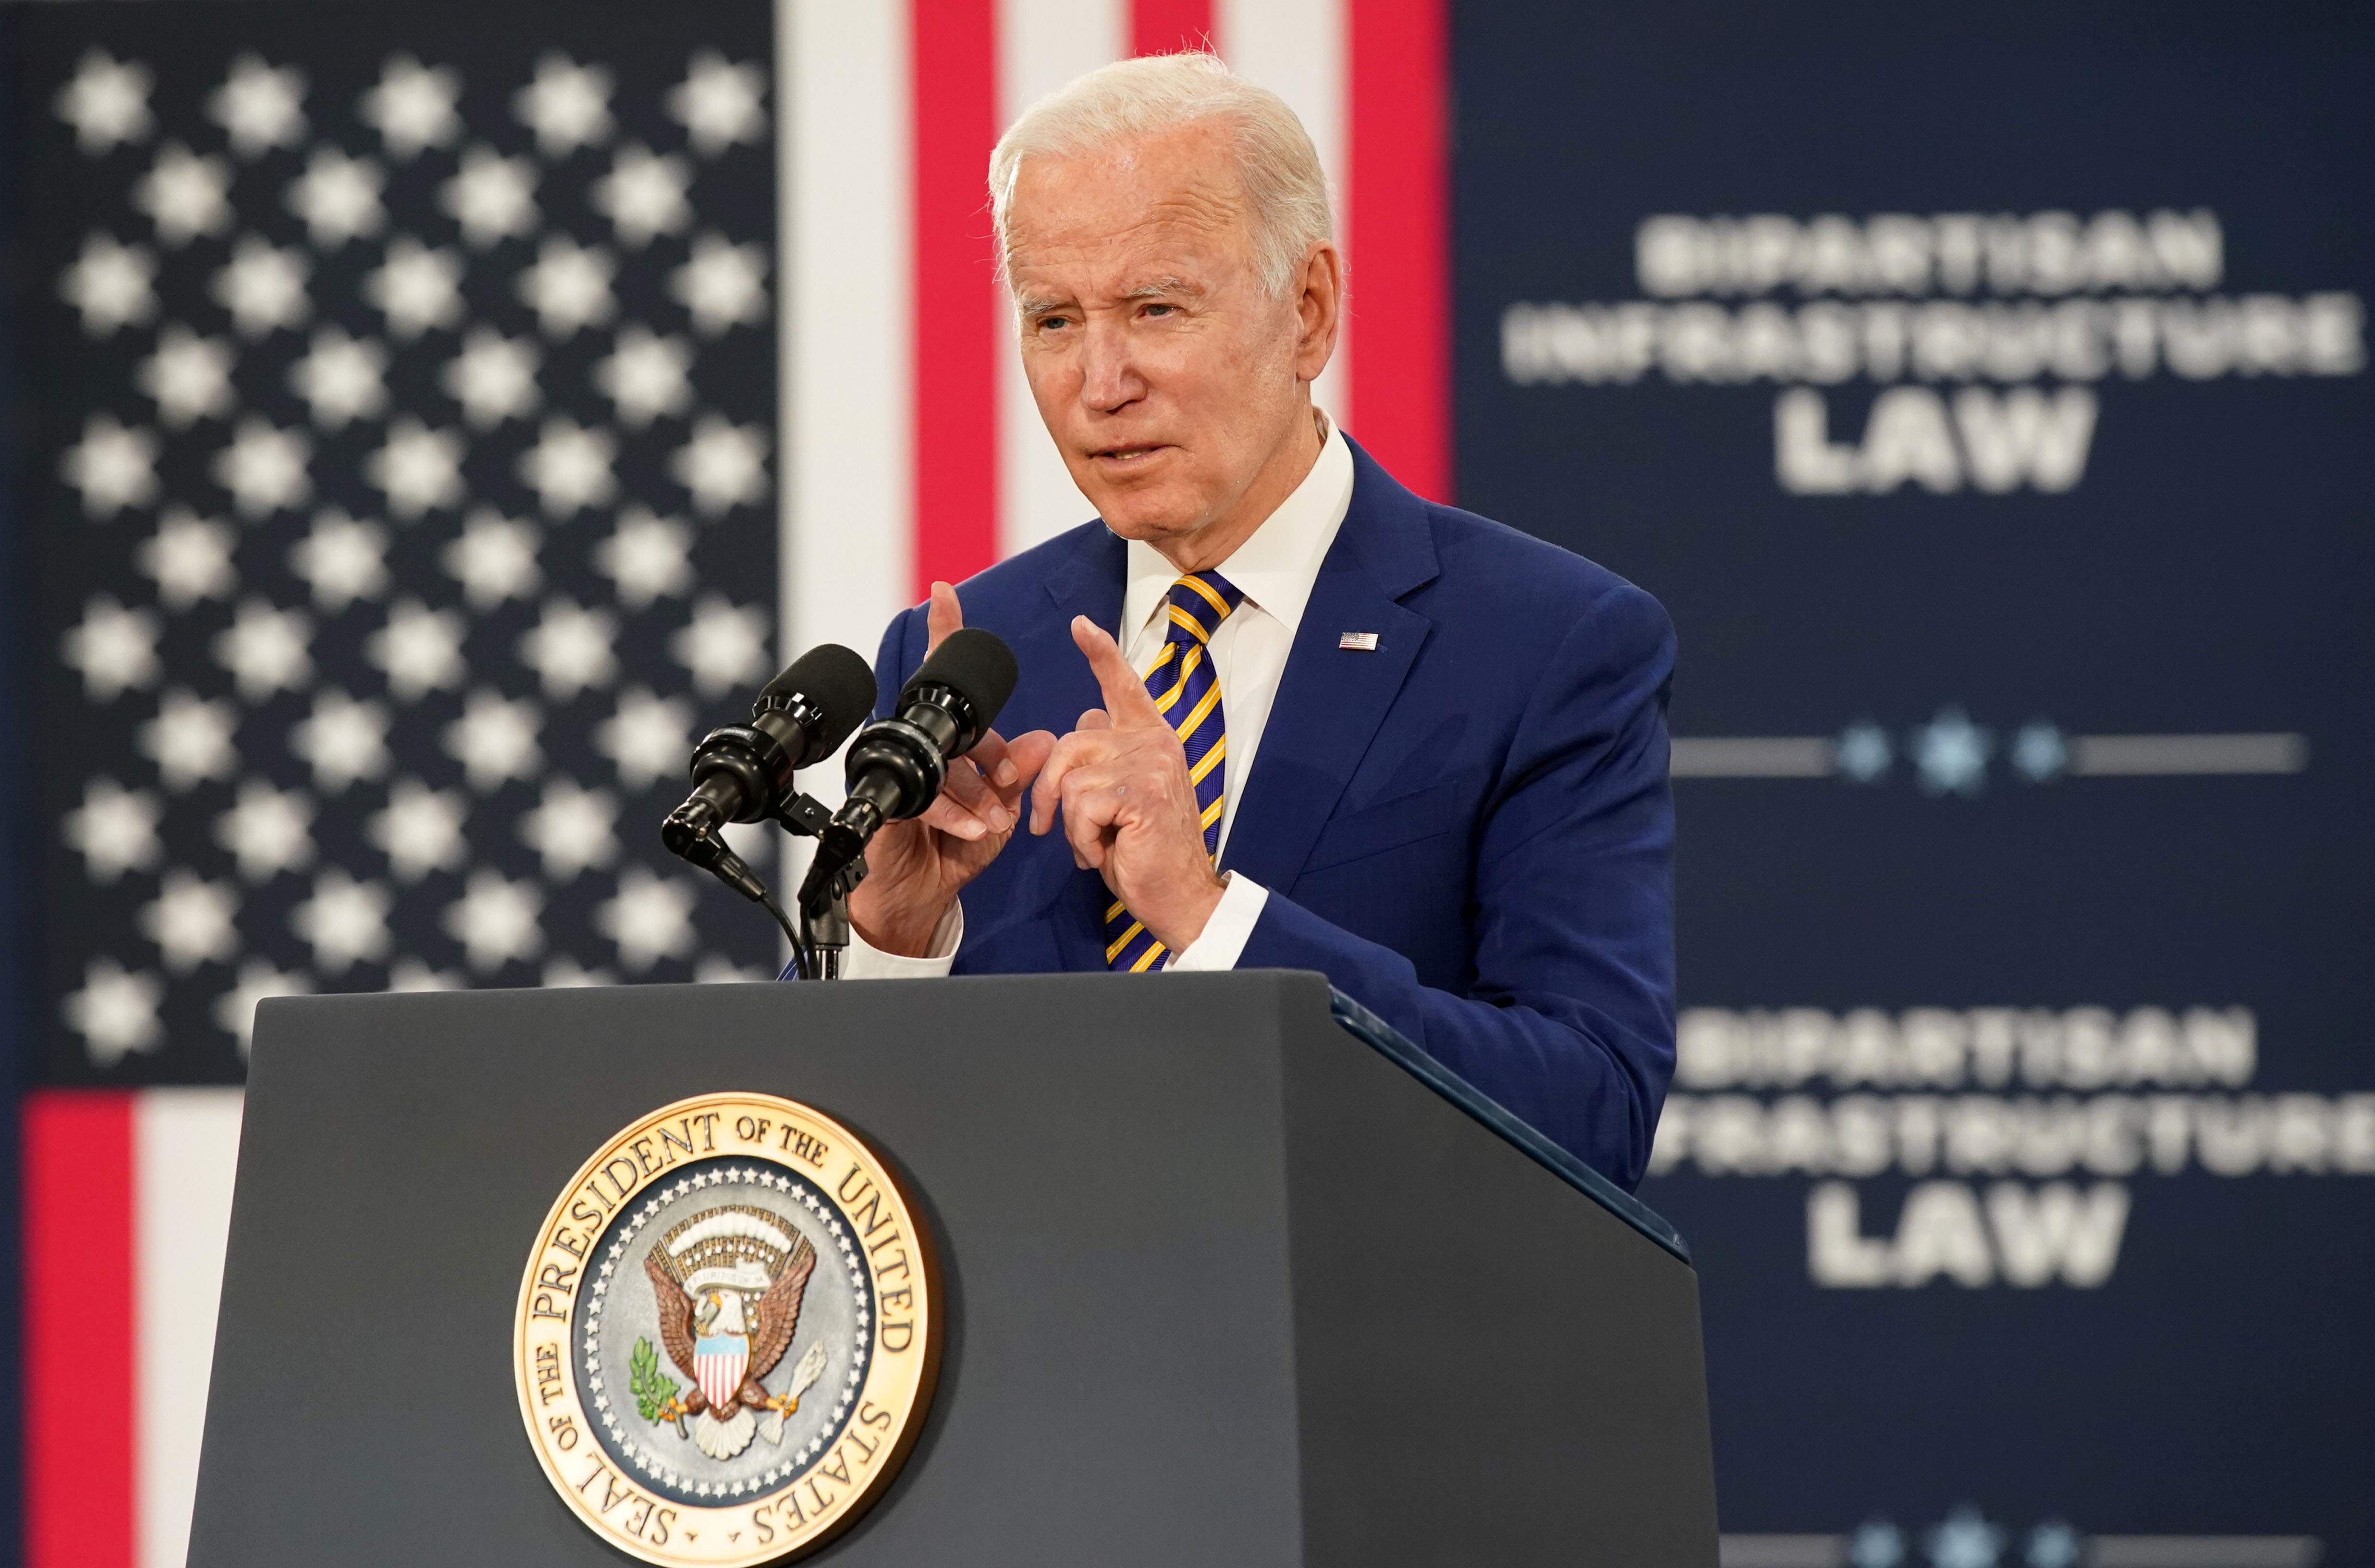 U.S. President Joe Biden delivers remarks on the bipartisan infrastructure law during a visit to Dakota County Technical College in Rosemount, Minnesota, U.S., November 30, 2021. REUTERS/Kevin Lamarque